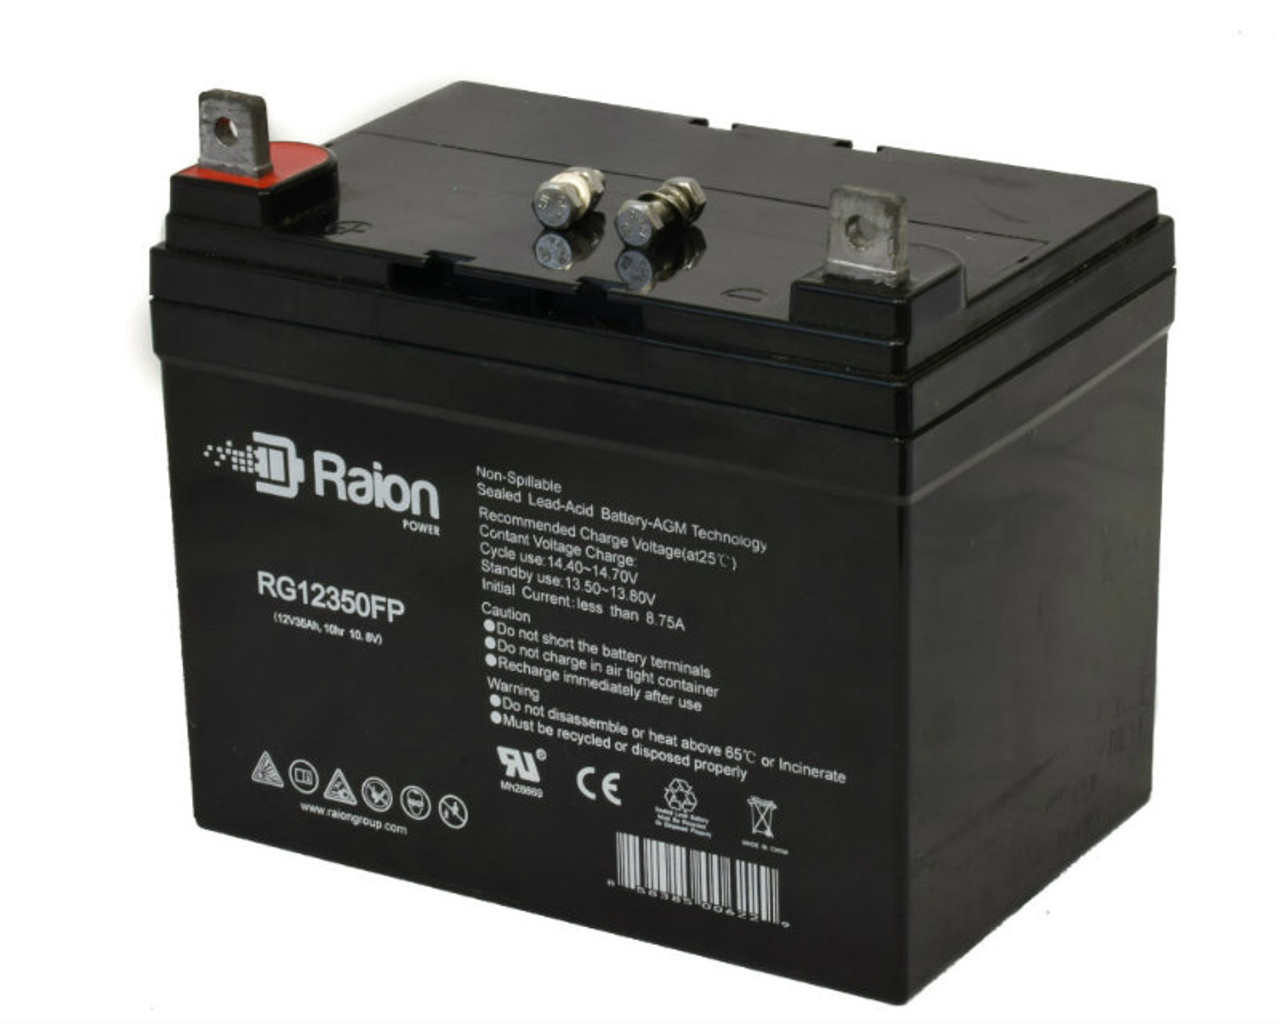 Raion Power Replacement 12V 35Ah Battery for Nair NR12-35 - 1 Pack